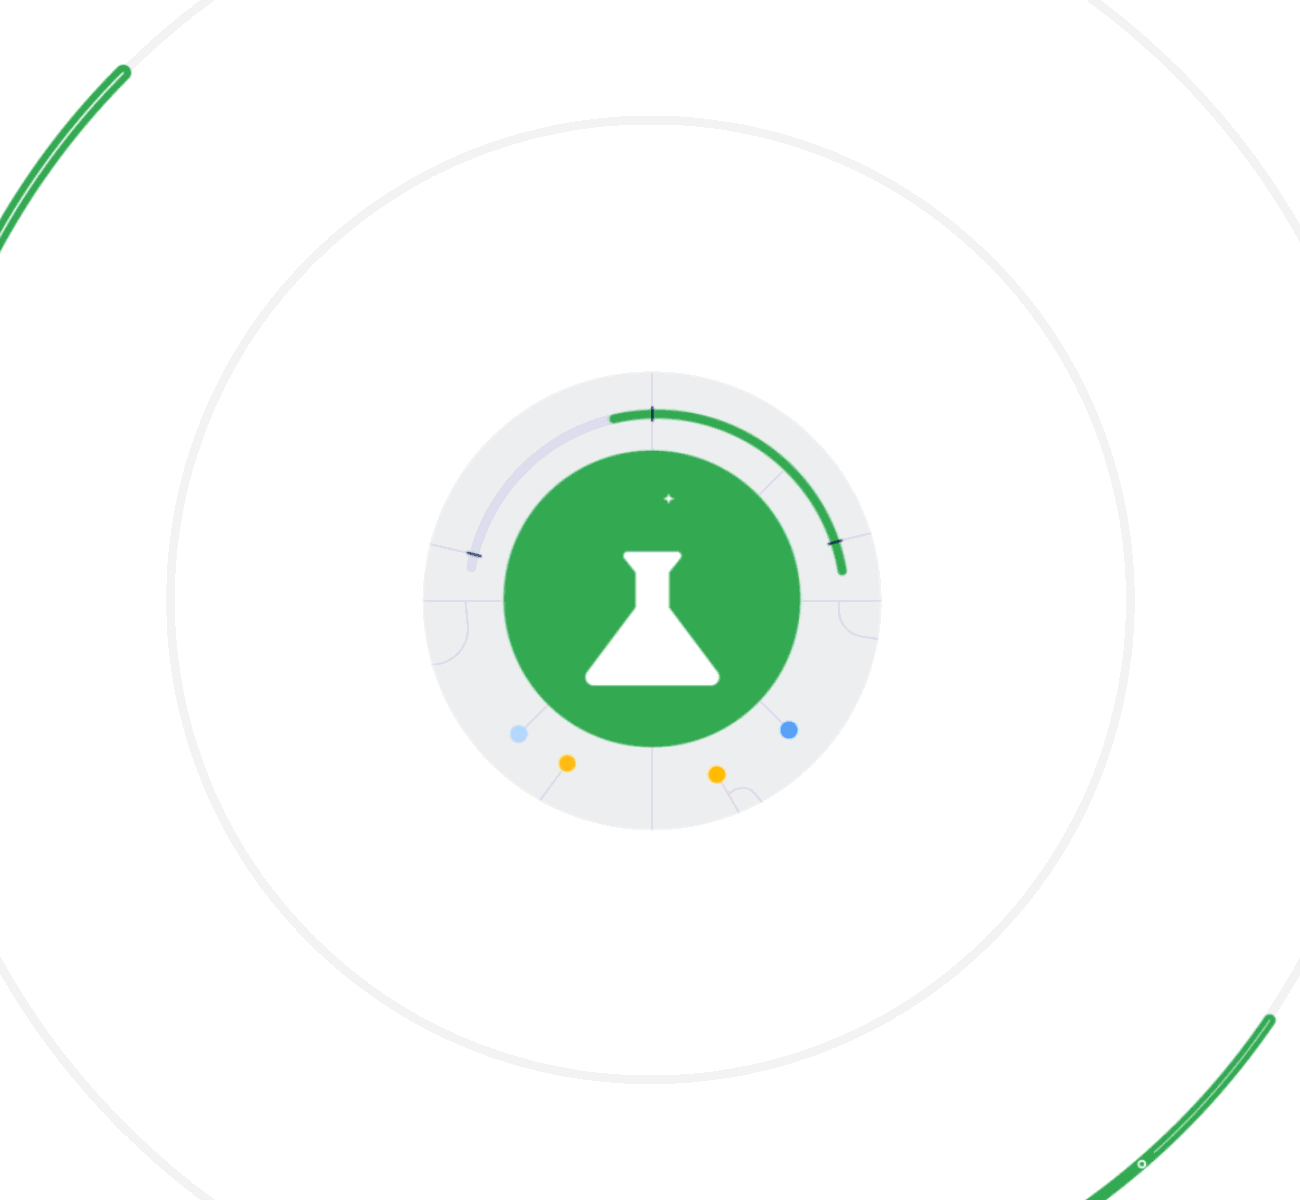 Illustration with channel icons orbiting in a circle